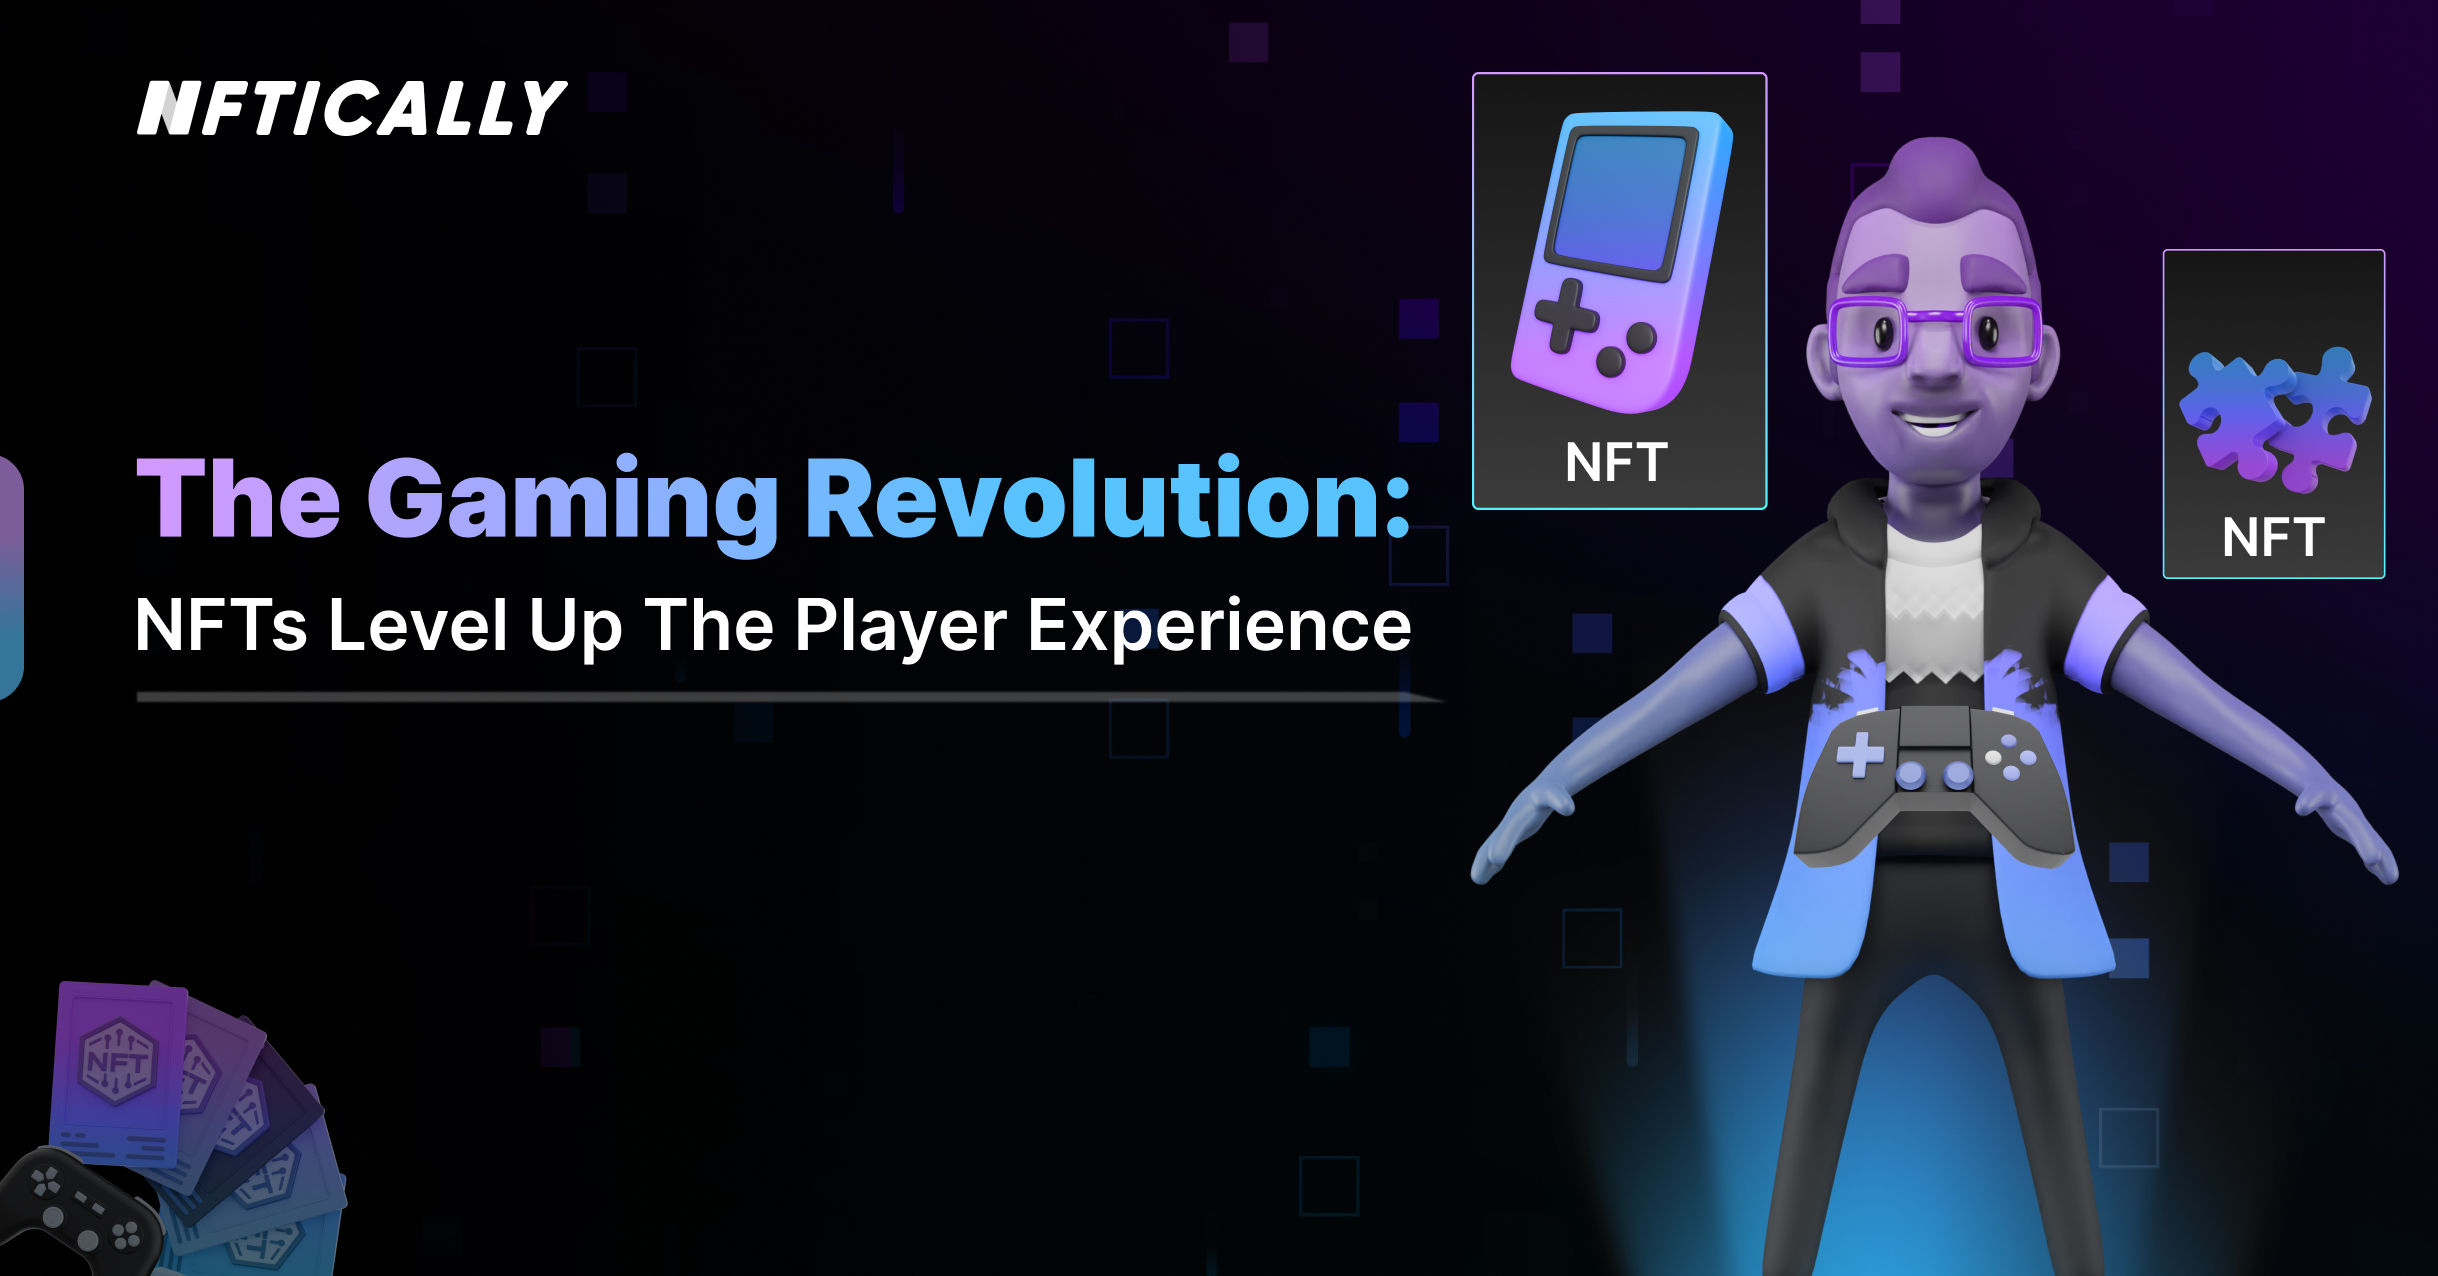 The Gaming Revolution: NFTs Level Up the Player Experience